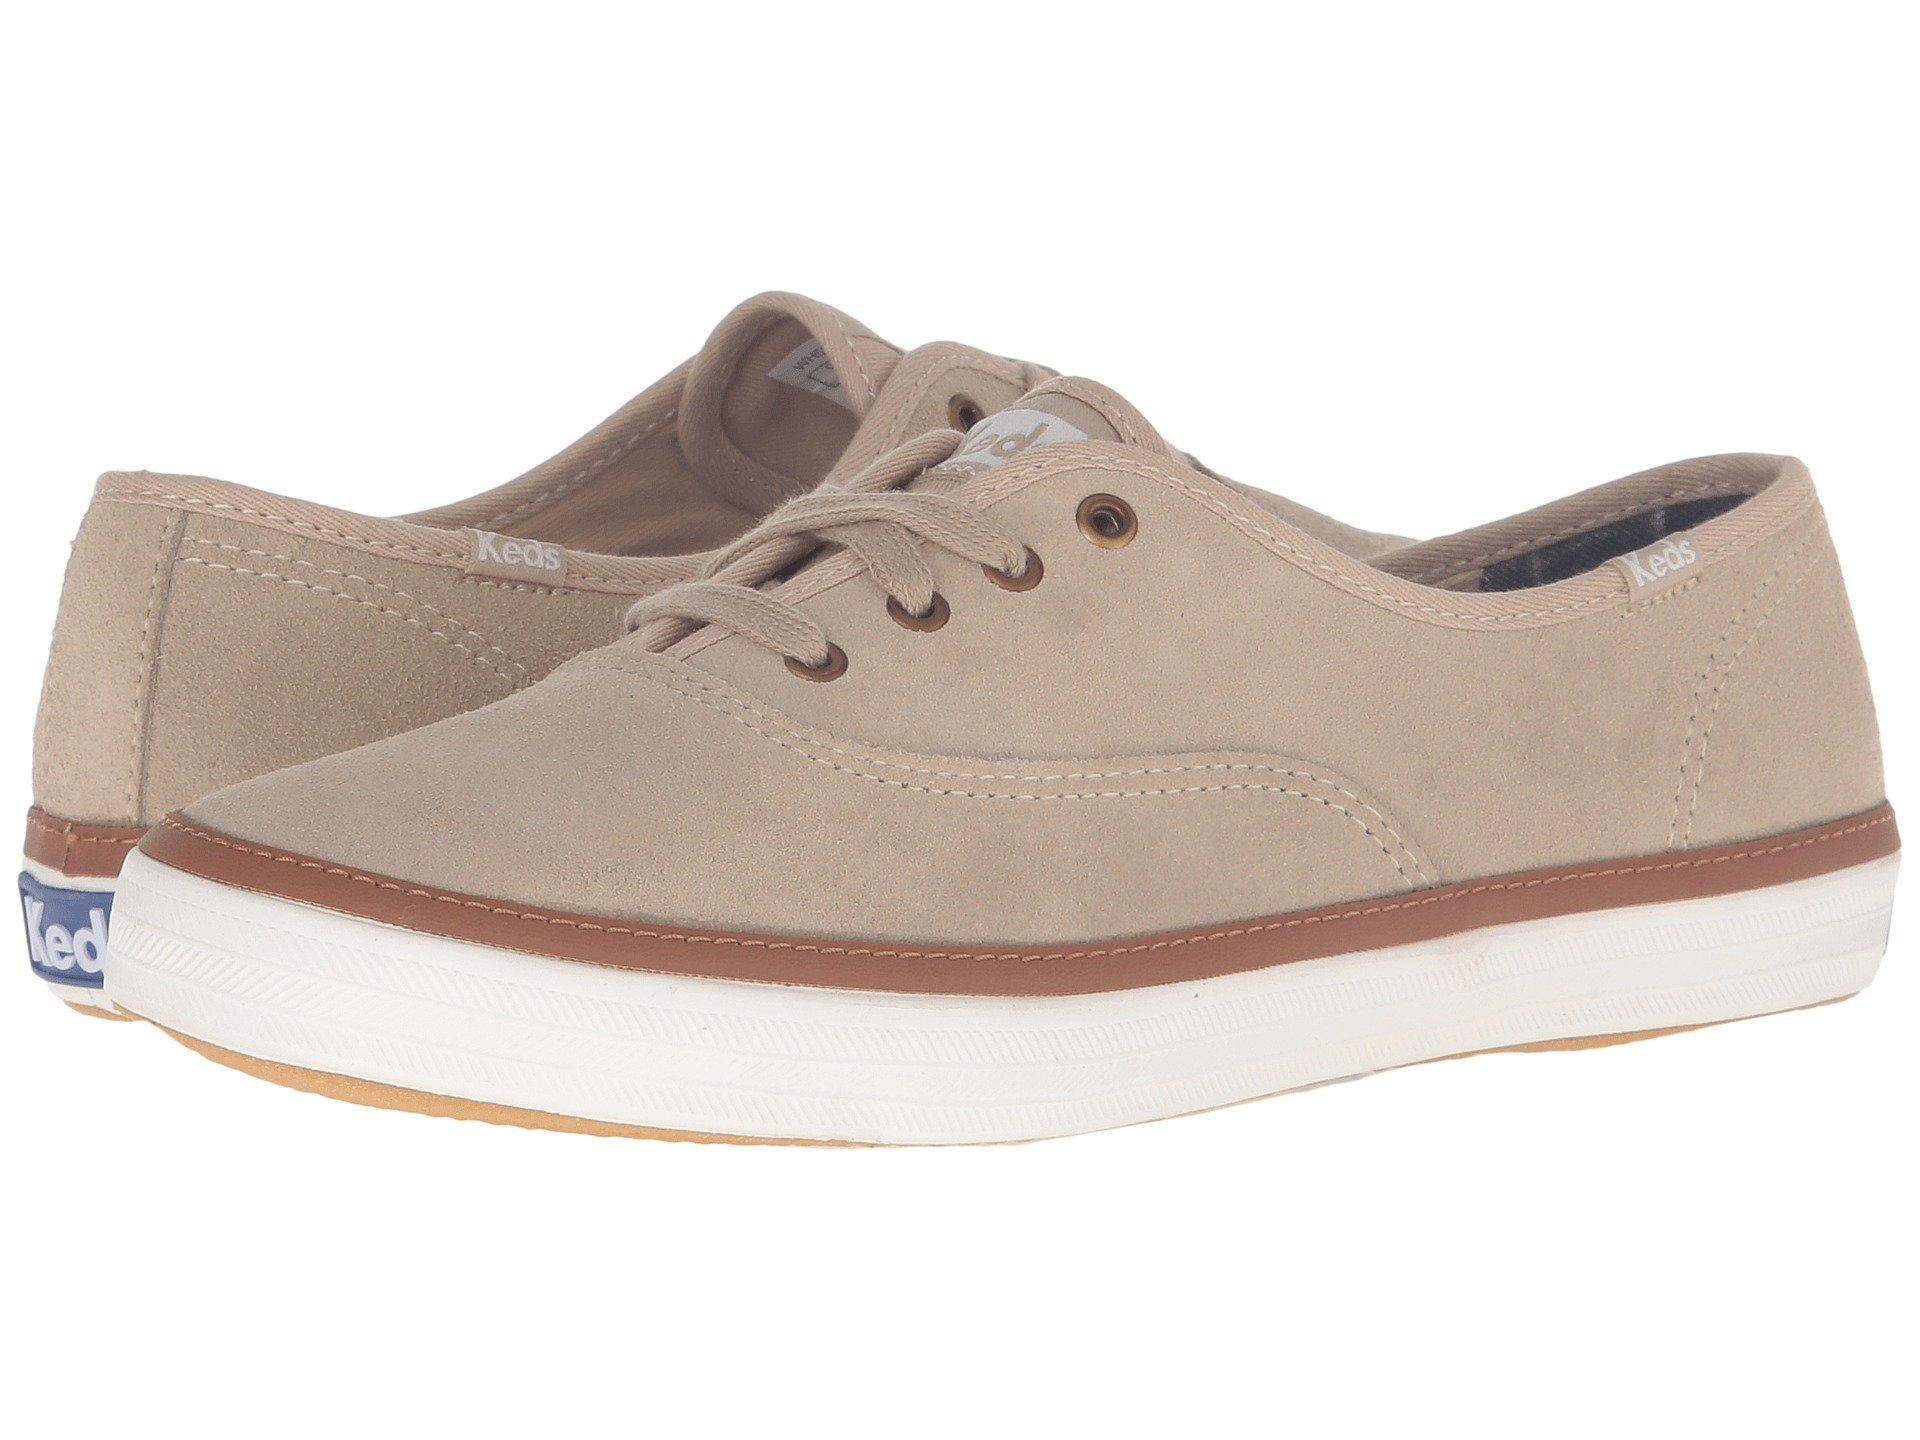 Keds Champion Suede In Tan | ModeSens